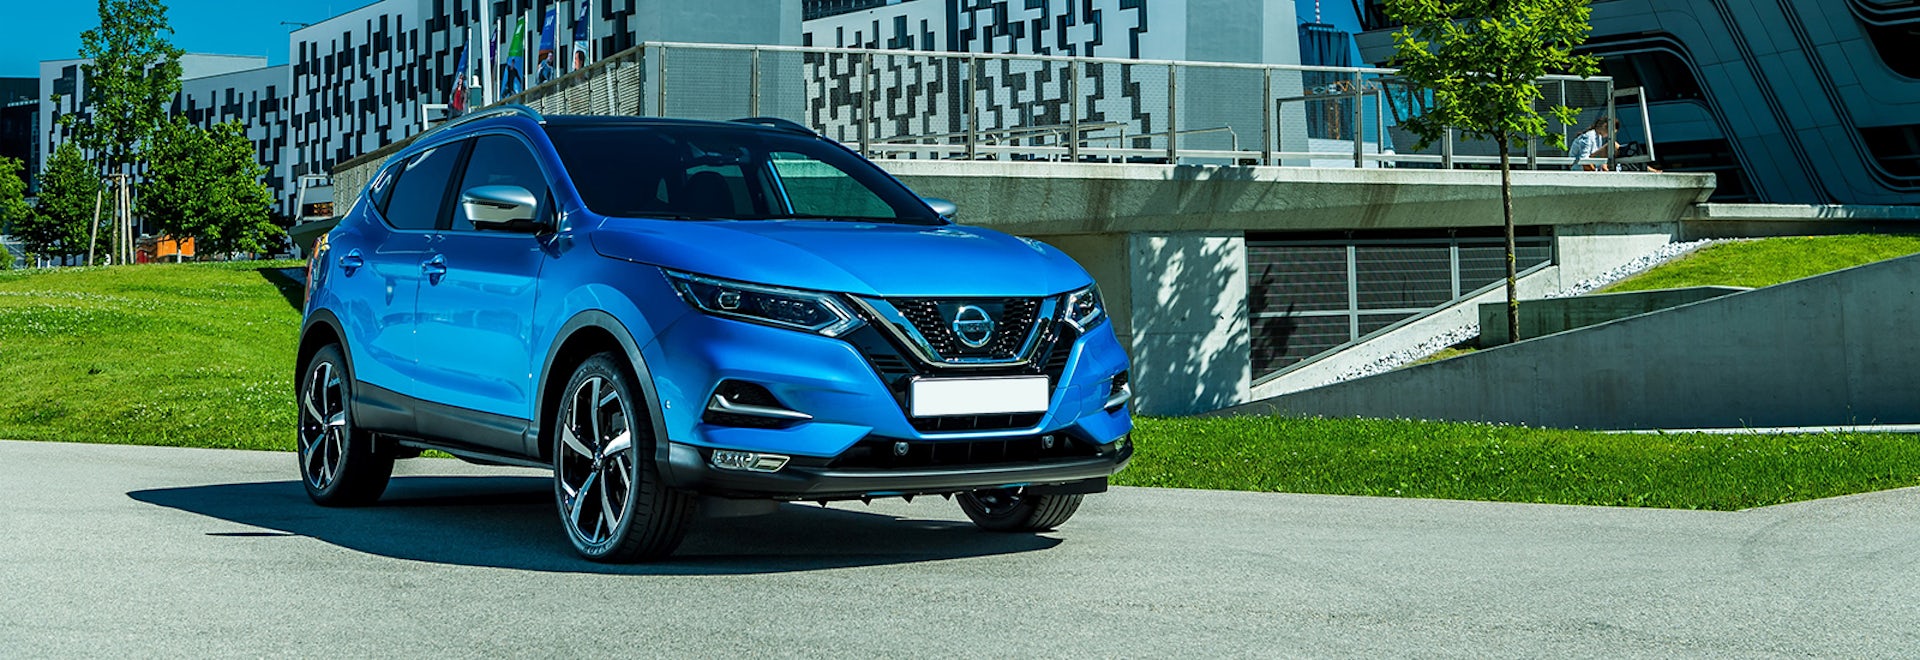 Nissan Qashqai size and dimensions guide carwow